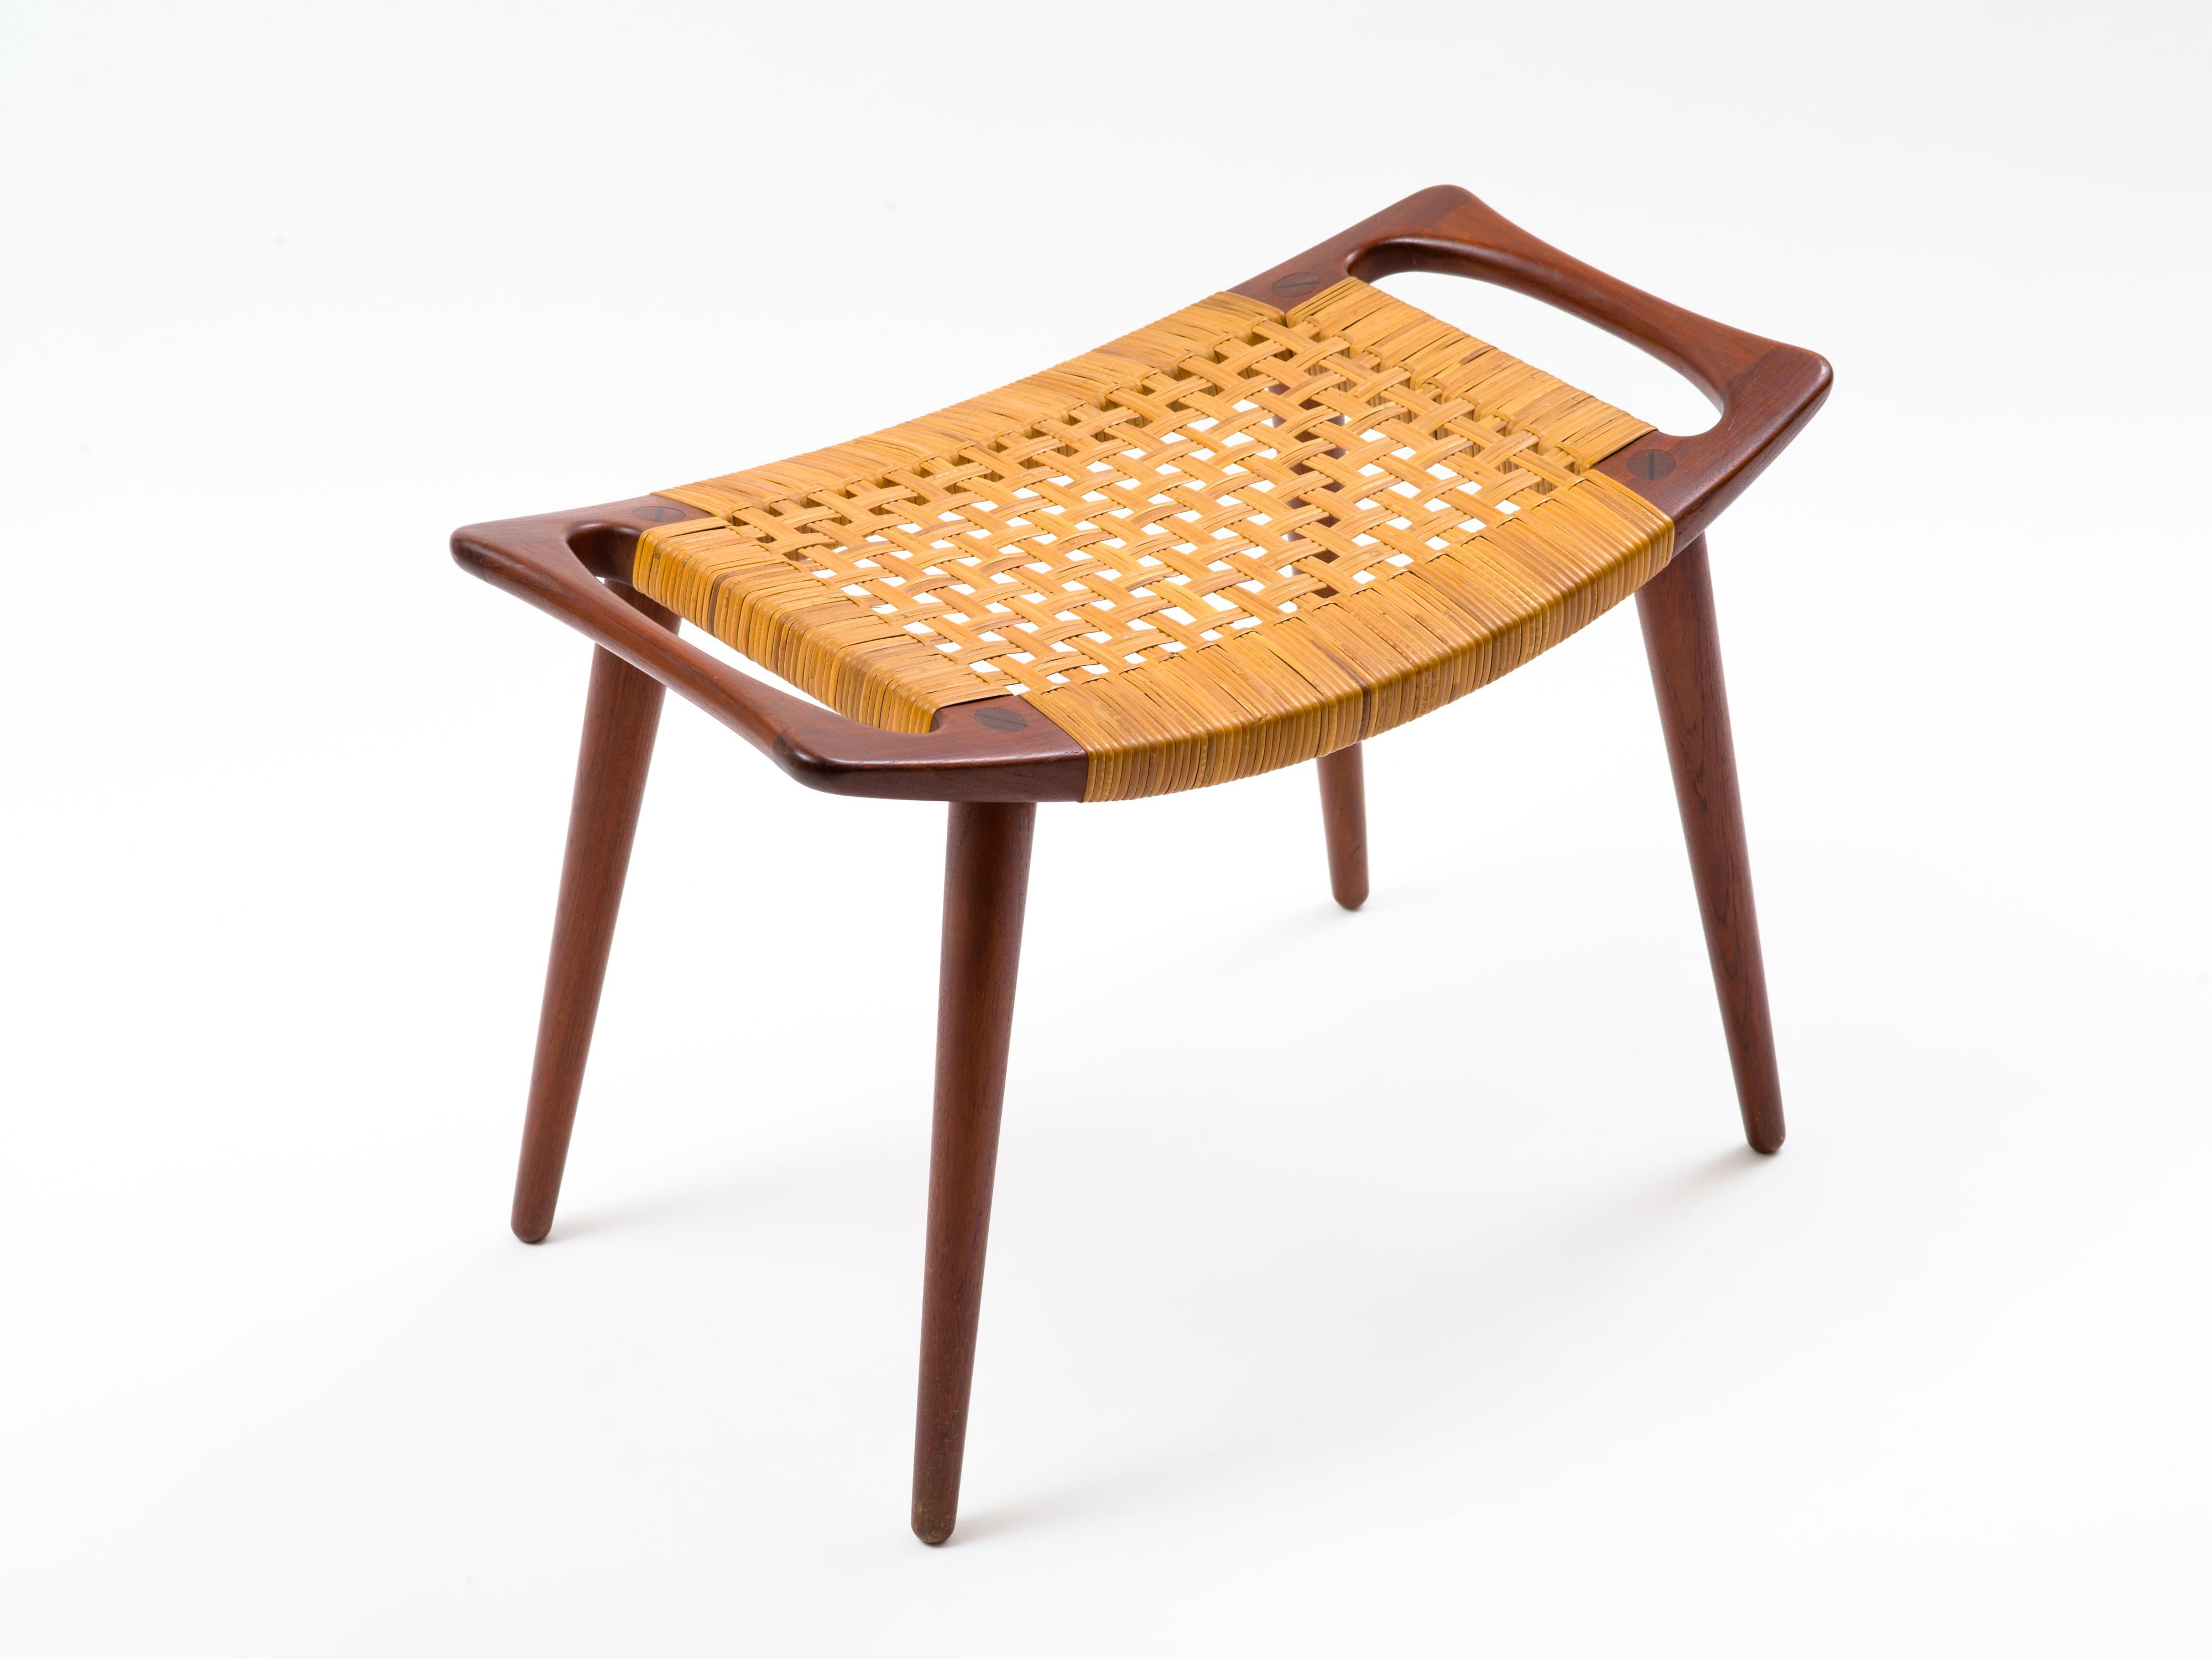 A handled stool, model JH 539, in solid teak with caned seat by Hans Wegner and built by cabinetmaker Johannes Hansen. In lovely, all original condition, this example retains its original caning which exhibits just a few small, inconspicuous breaks.